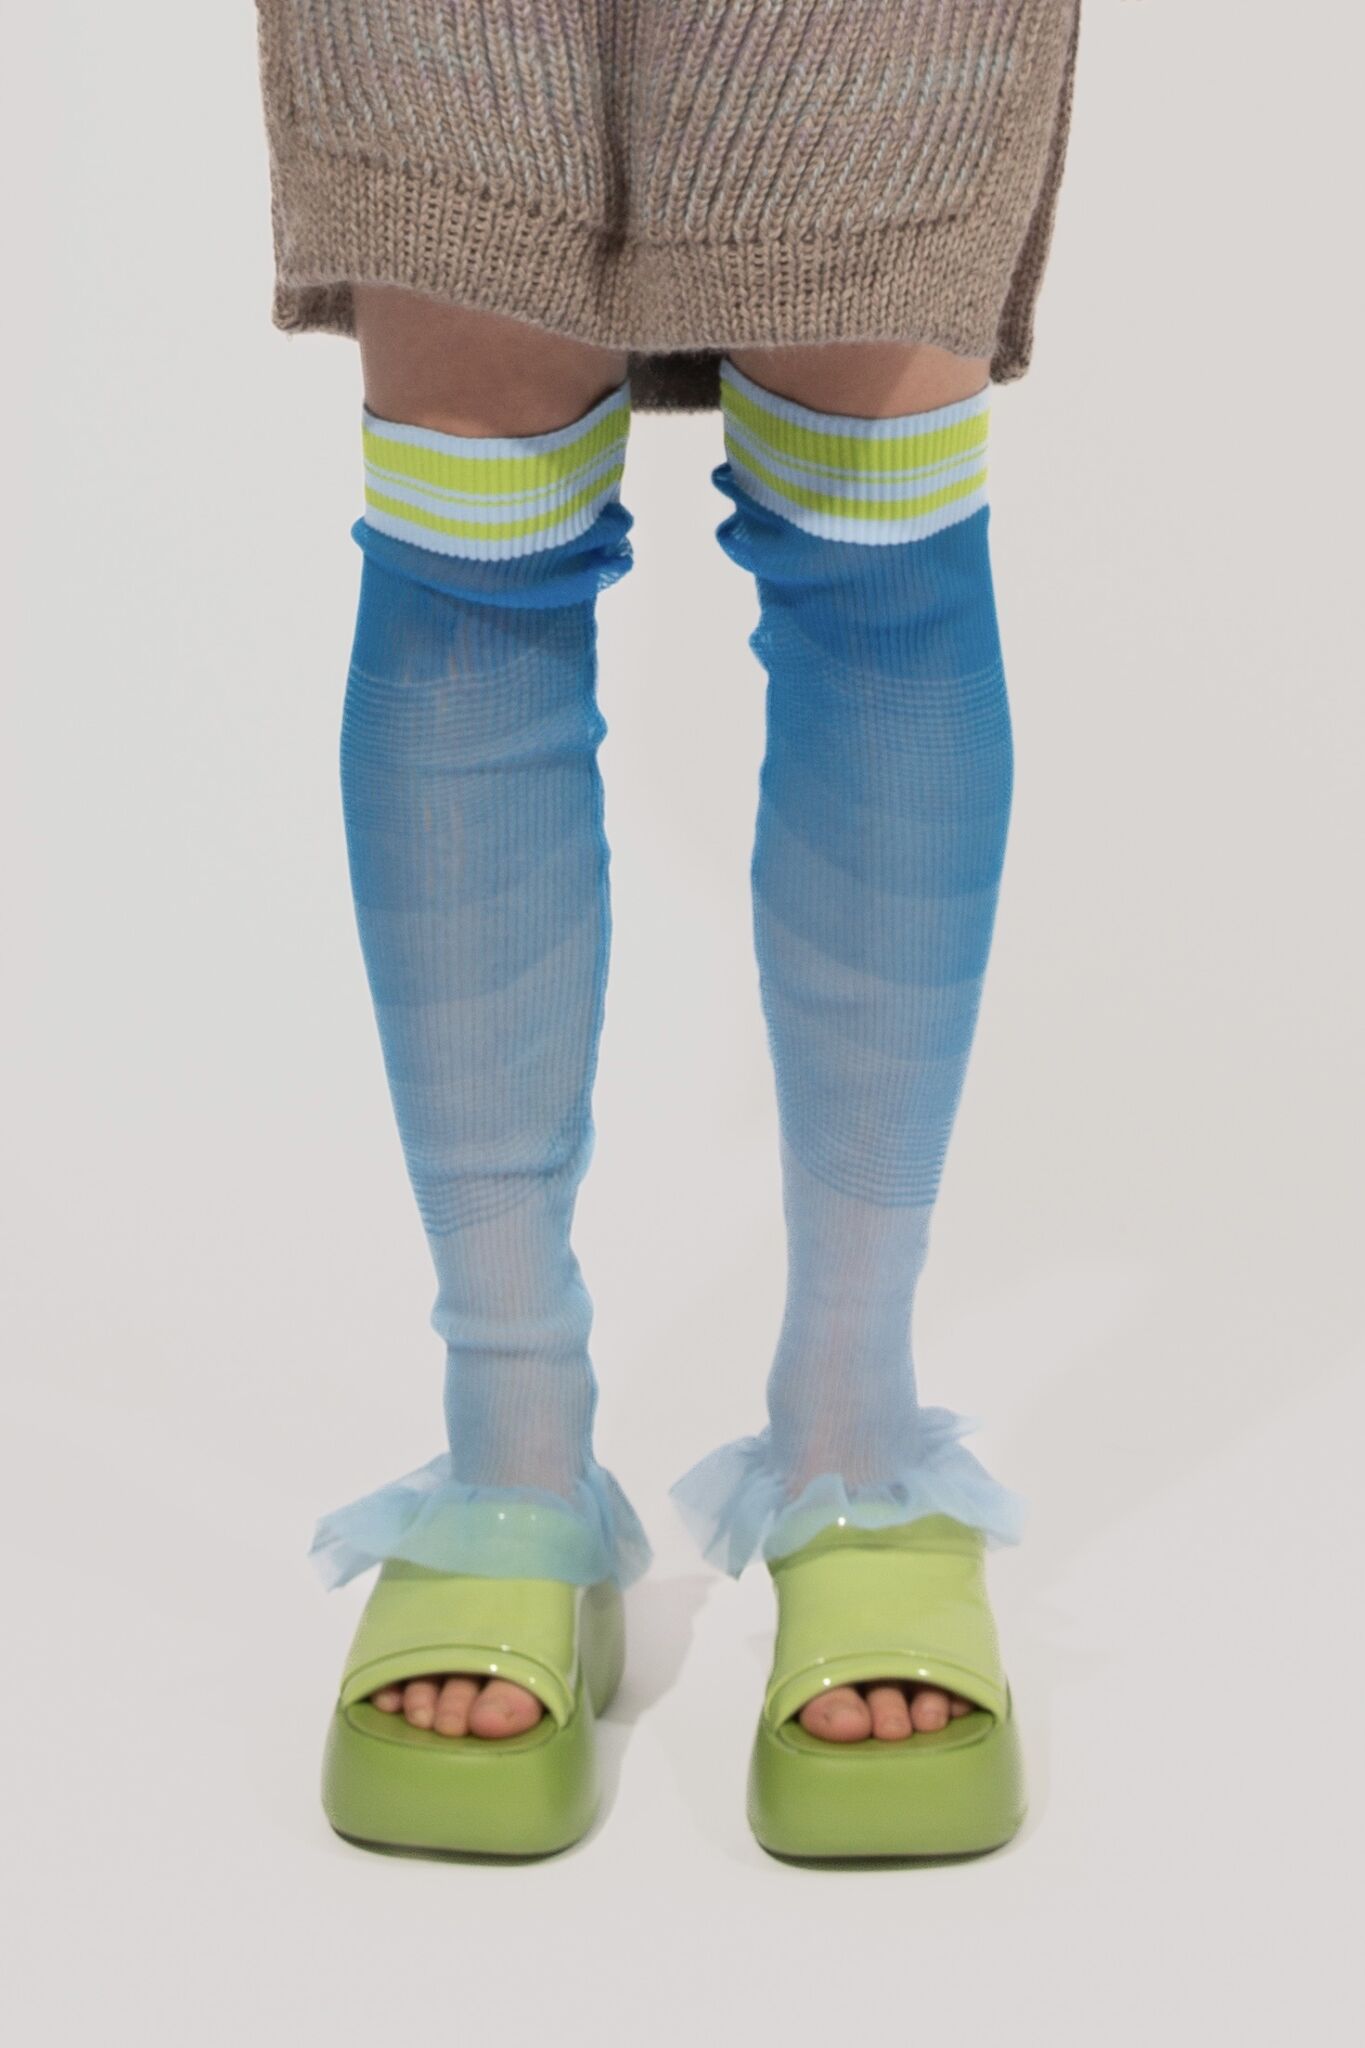 Gradient Frills in blue and lime, knitted, below the knee or the arms